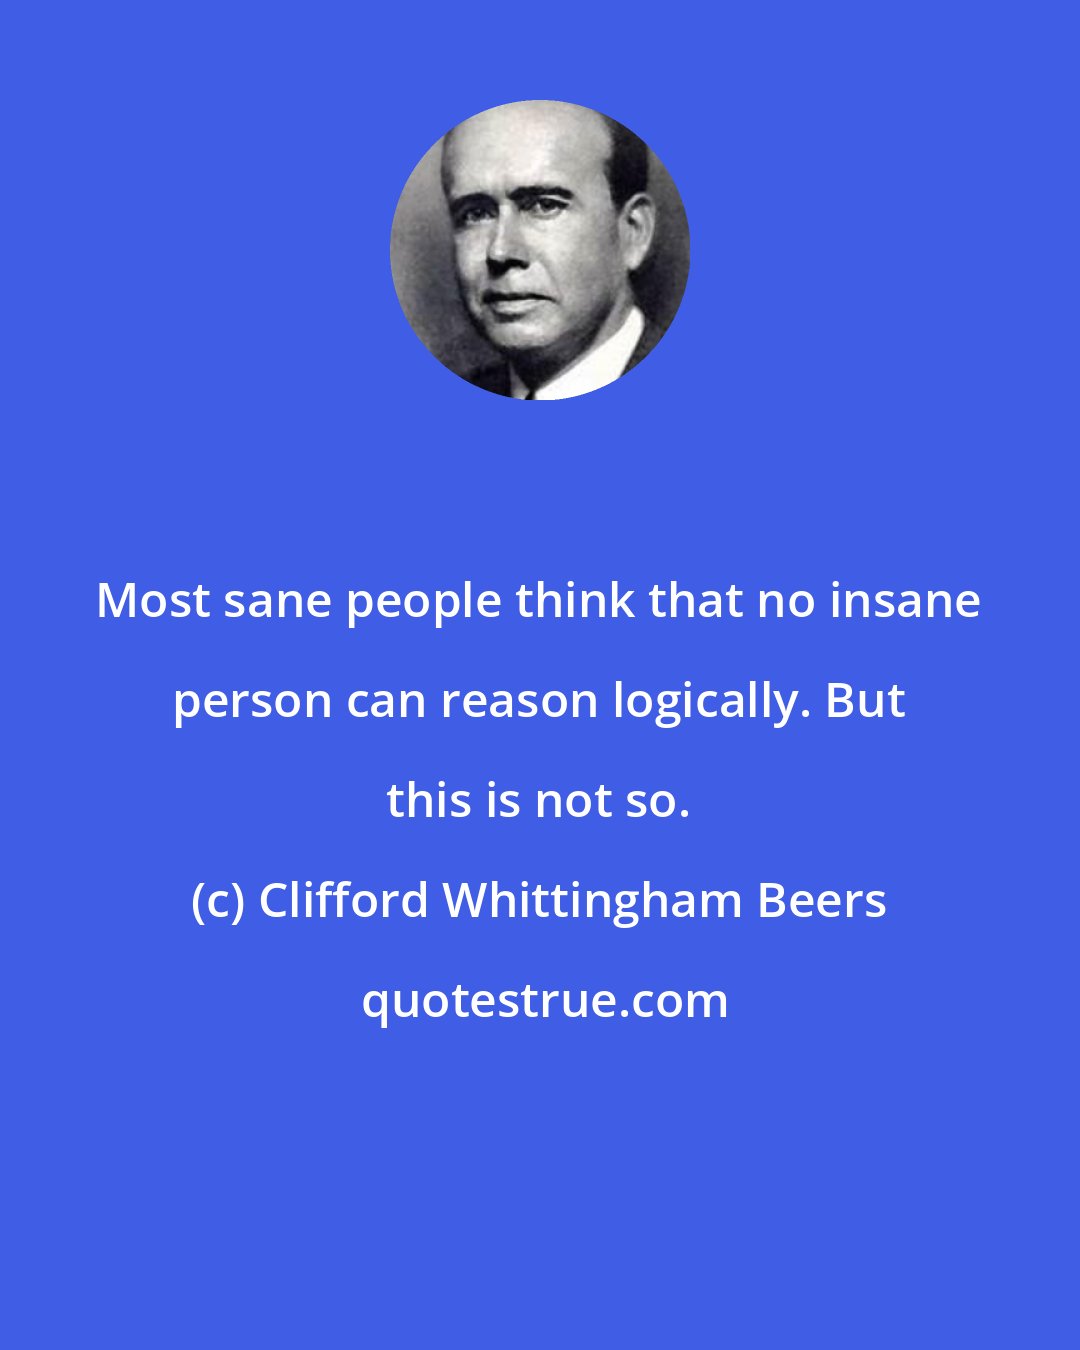 Clifford Whittingham Beers: Most sane people think that no insane person can reason logically. But this is not so.